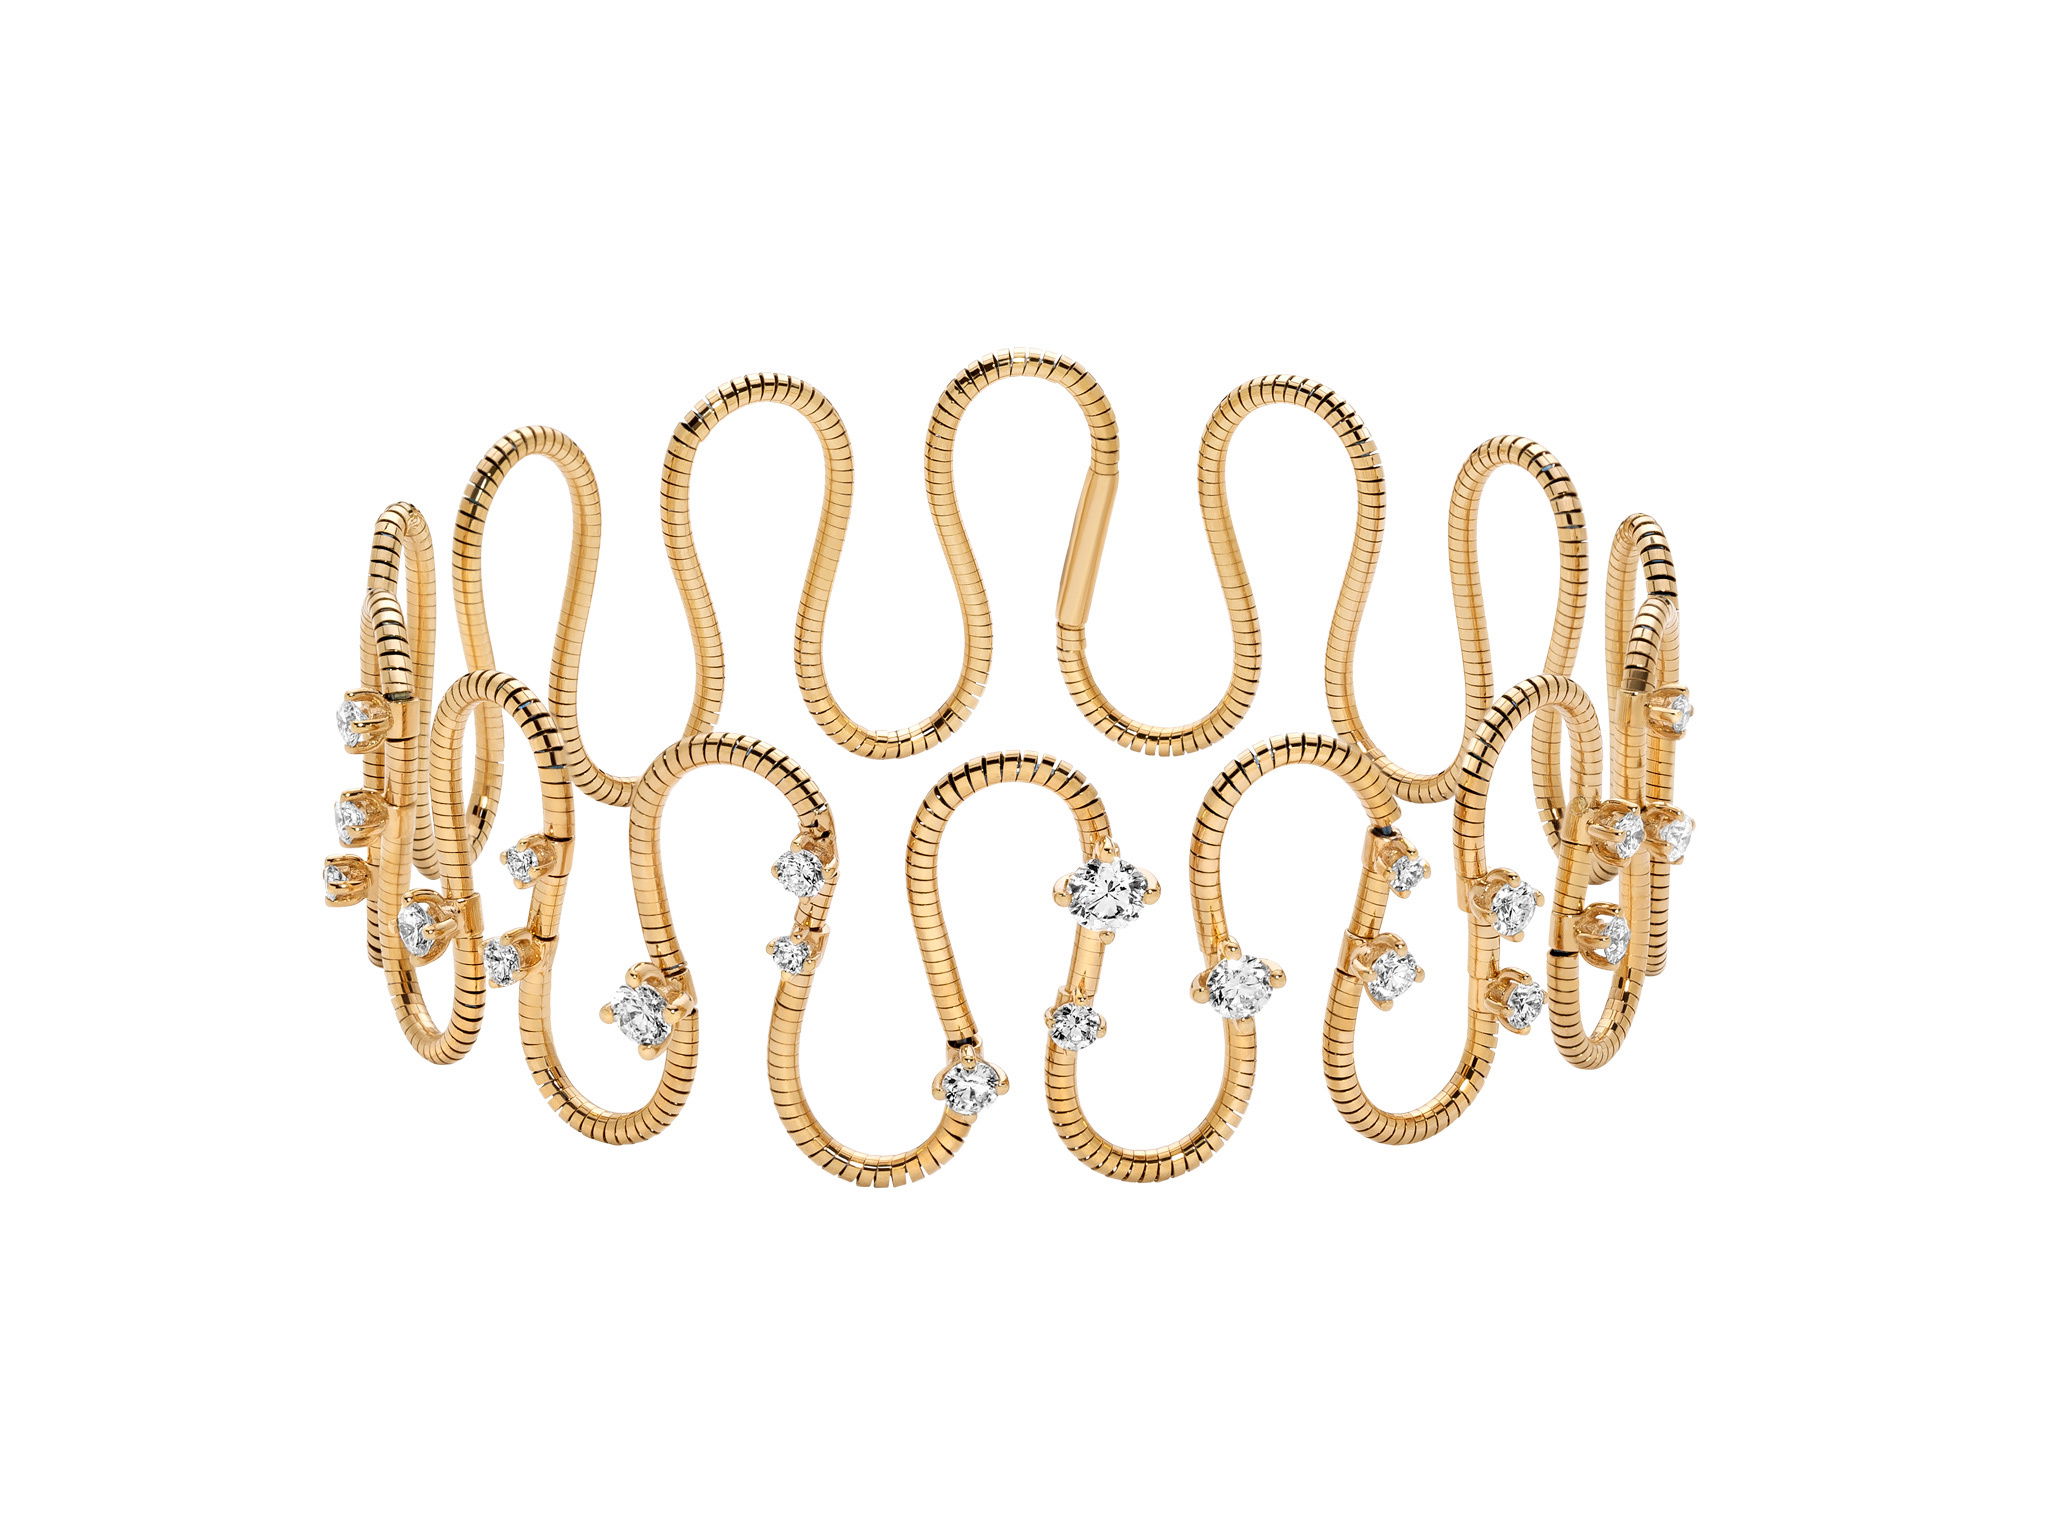 NOVELTIES Narrow Squiggle Bracelet with White Diamonds in 18kt Yellow Gold - One Size